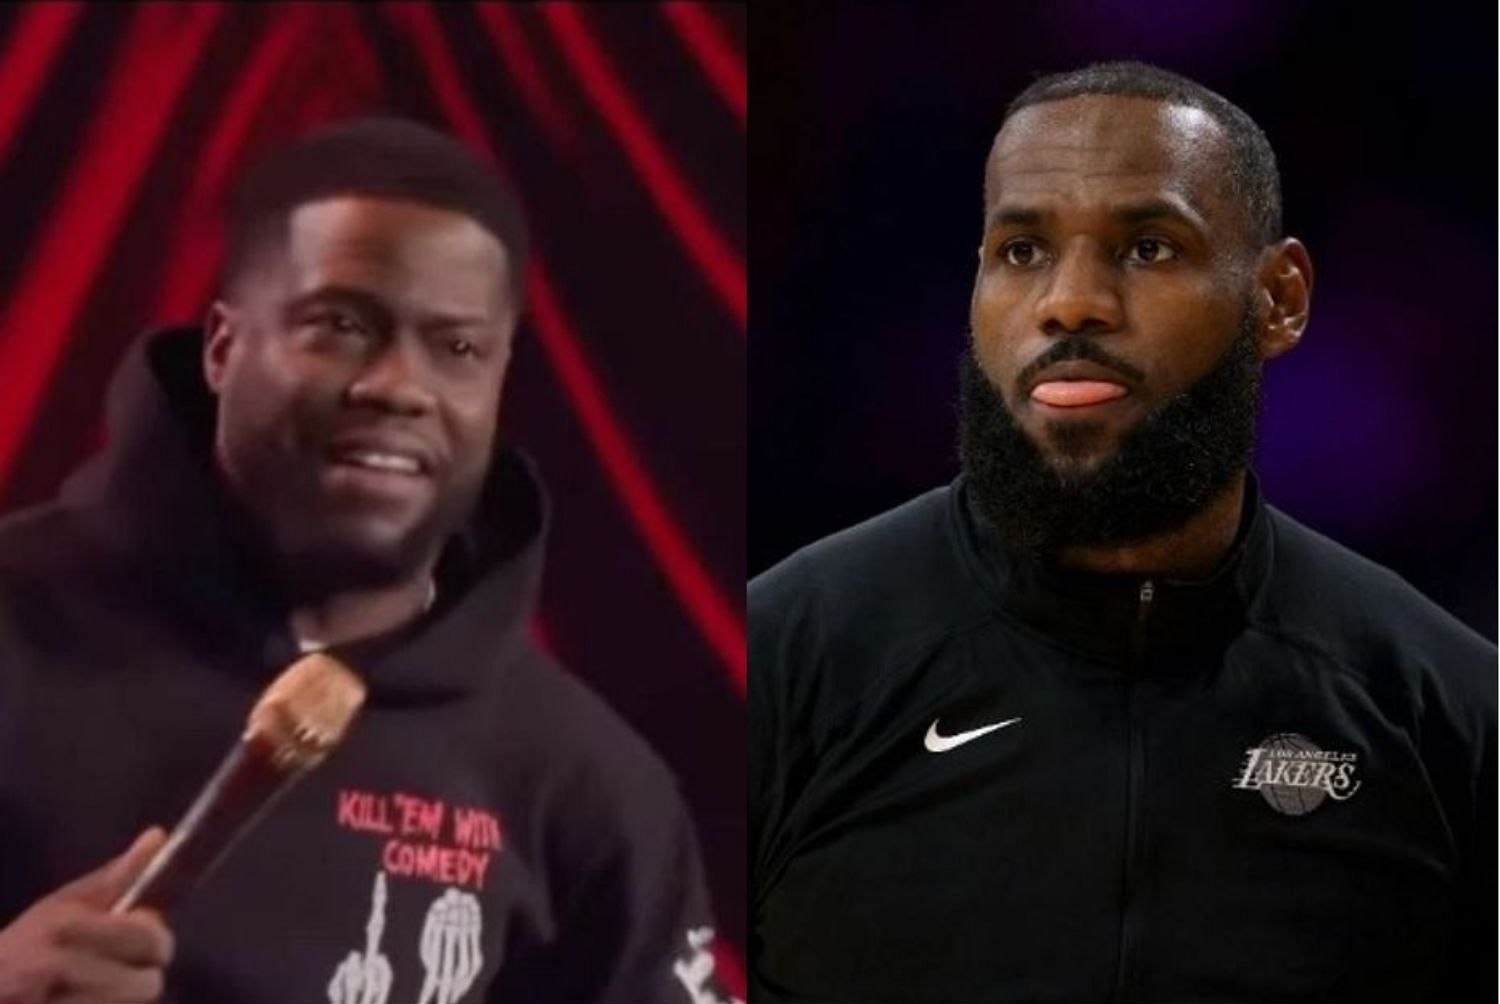 Kevin Hart (L) said there is no denying the greatness of LeBron James (R).